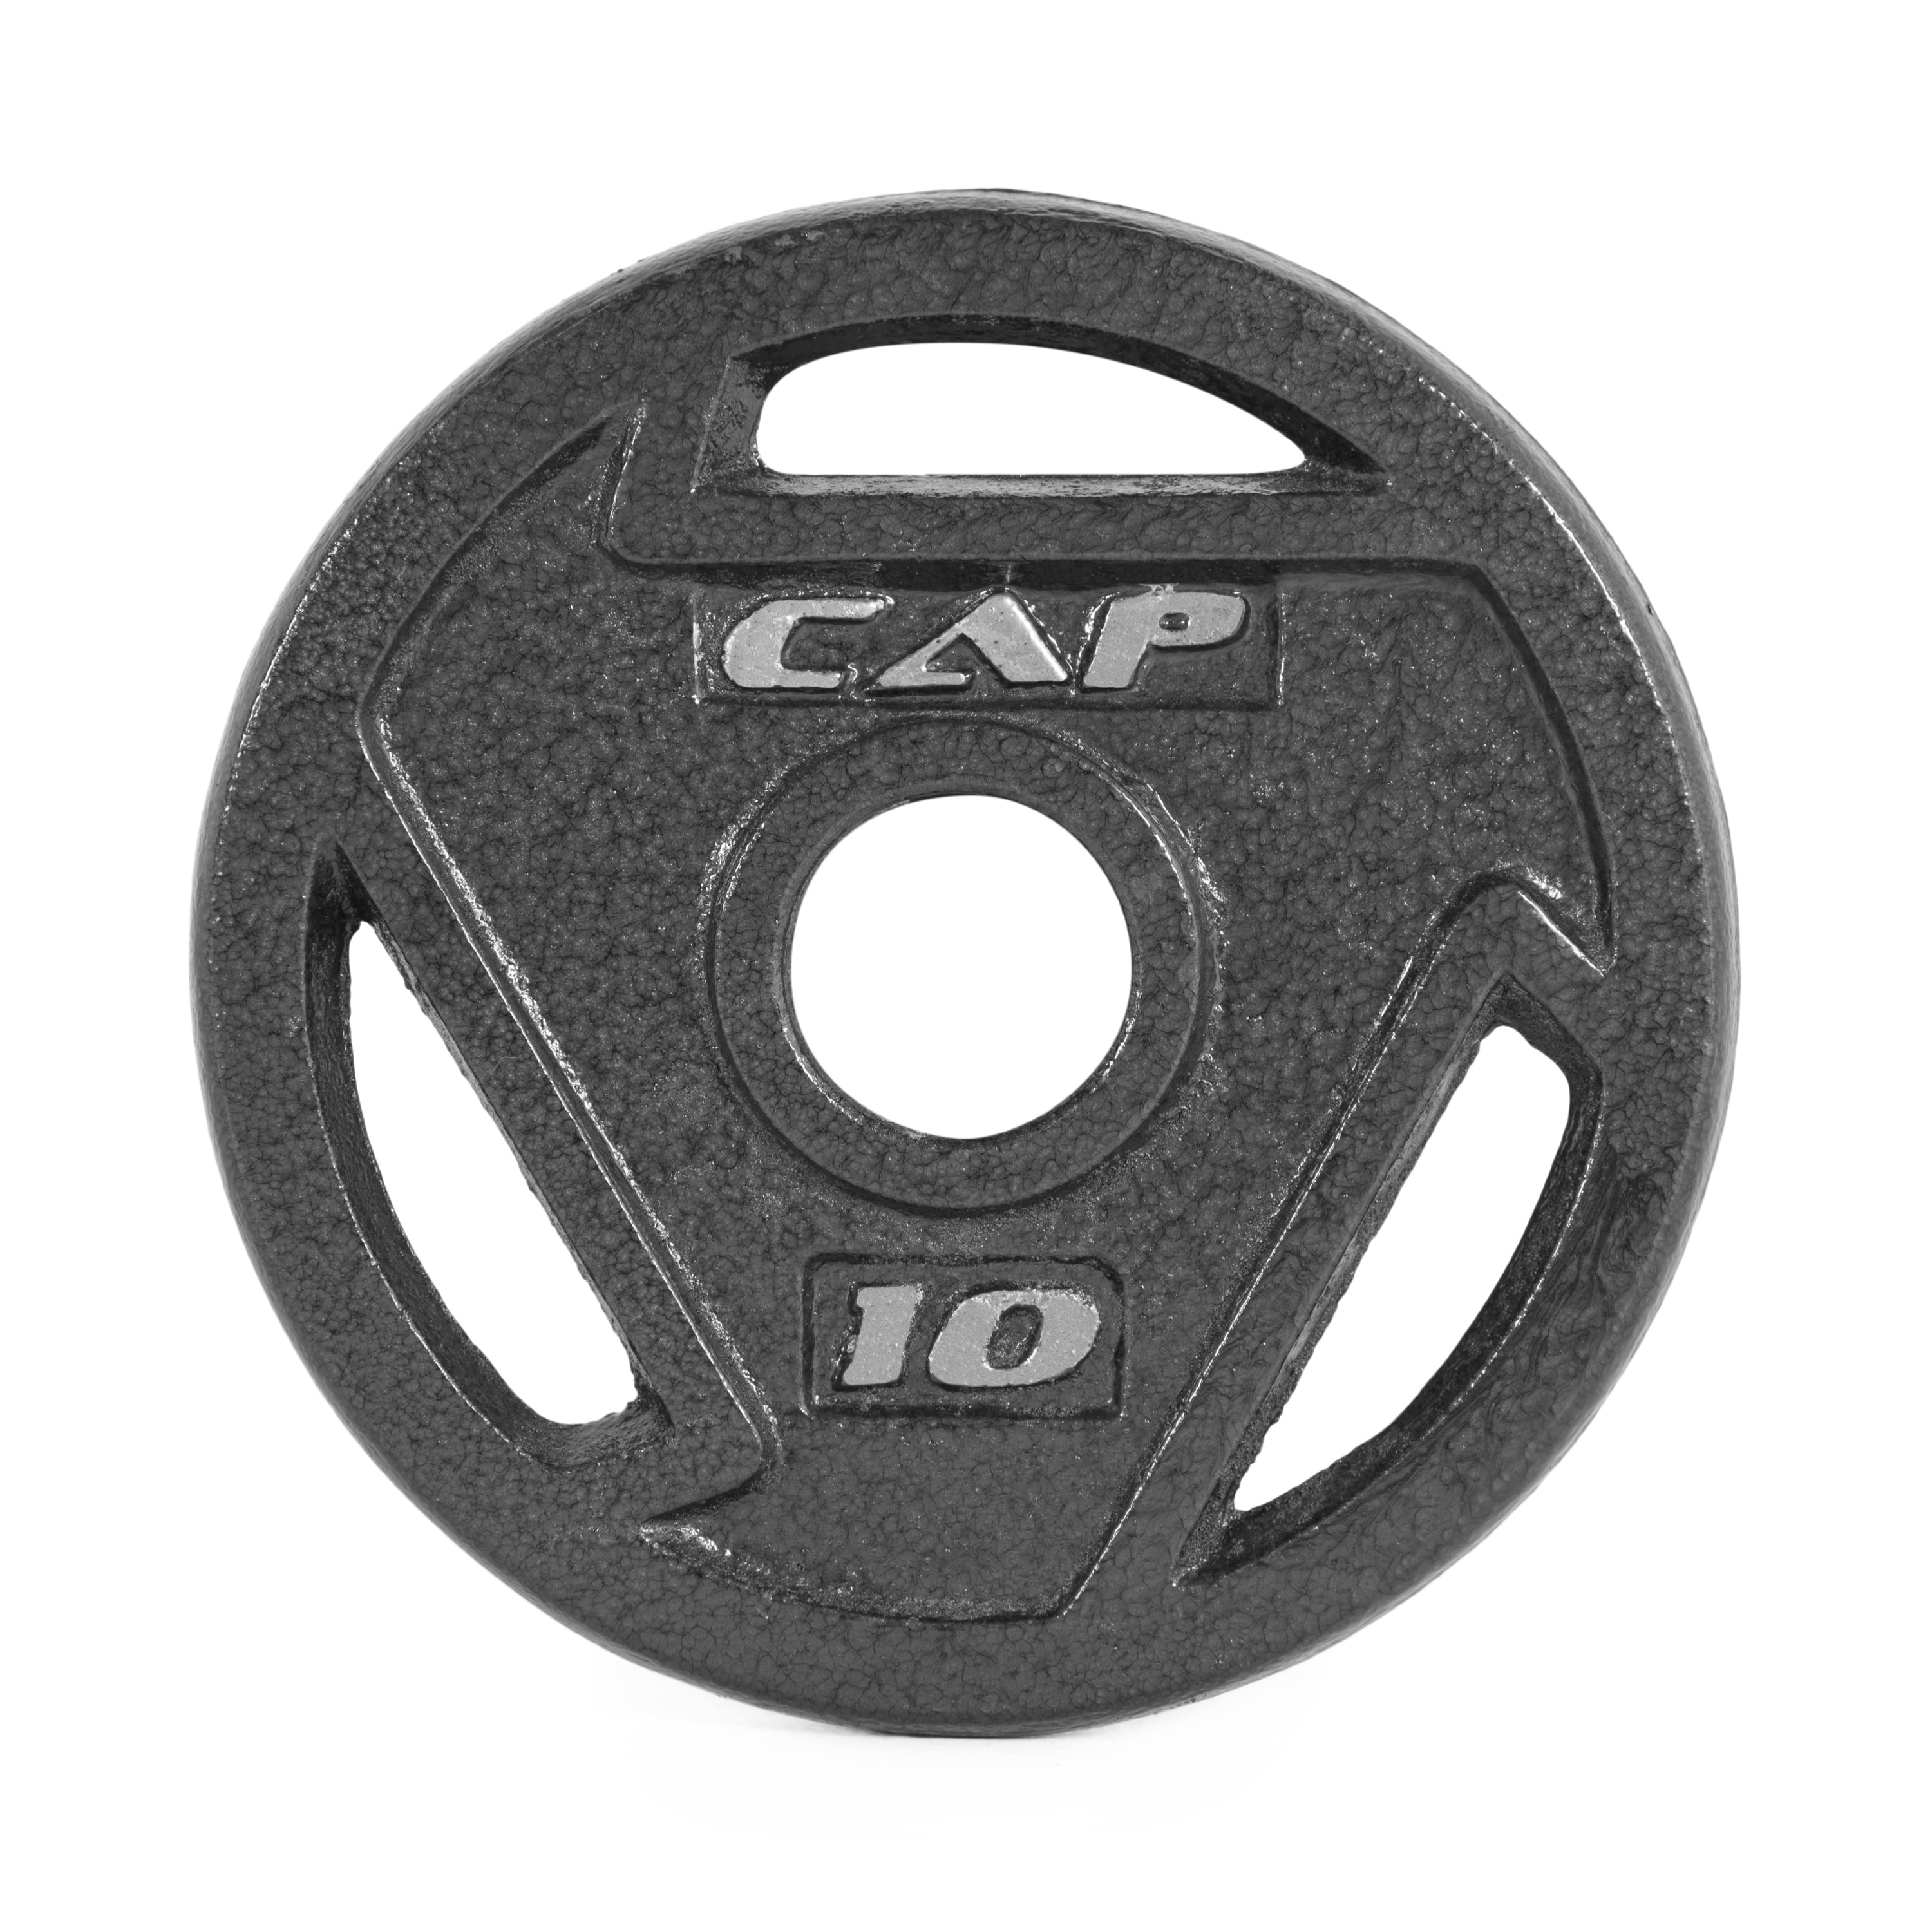 SHIPS TODAY! NEW 4 CAP Standard 1 Inch Grip 10 Lb Weight Plates Total 40 Lb 